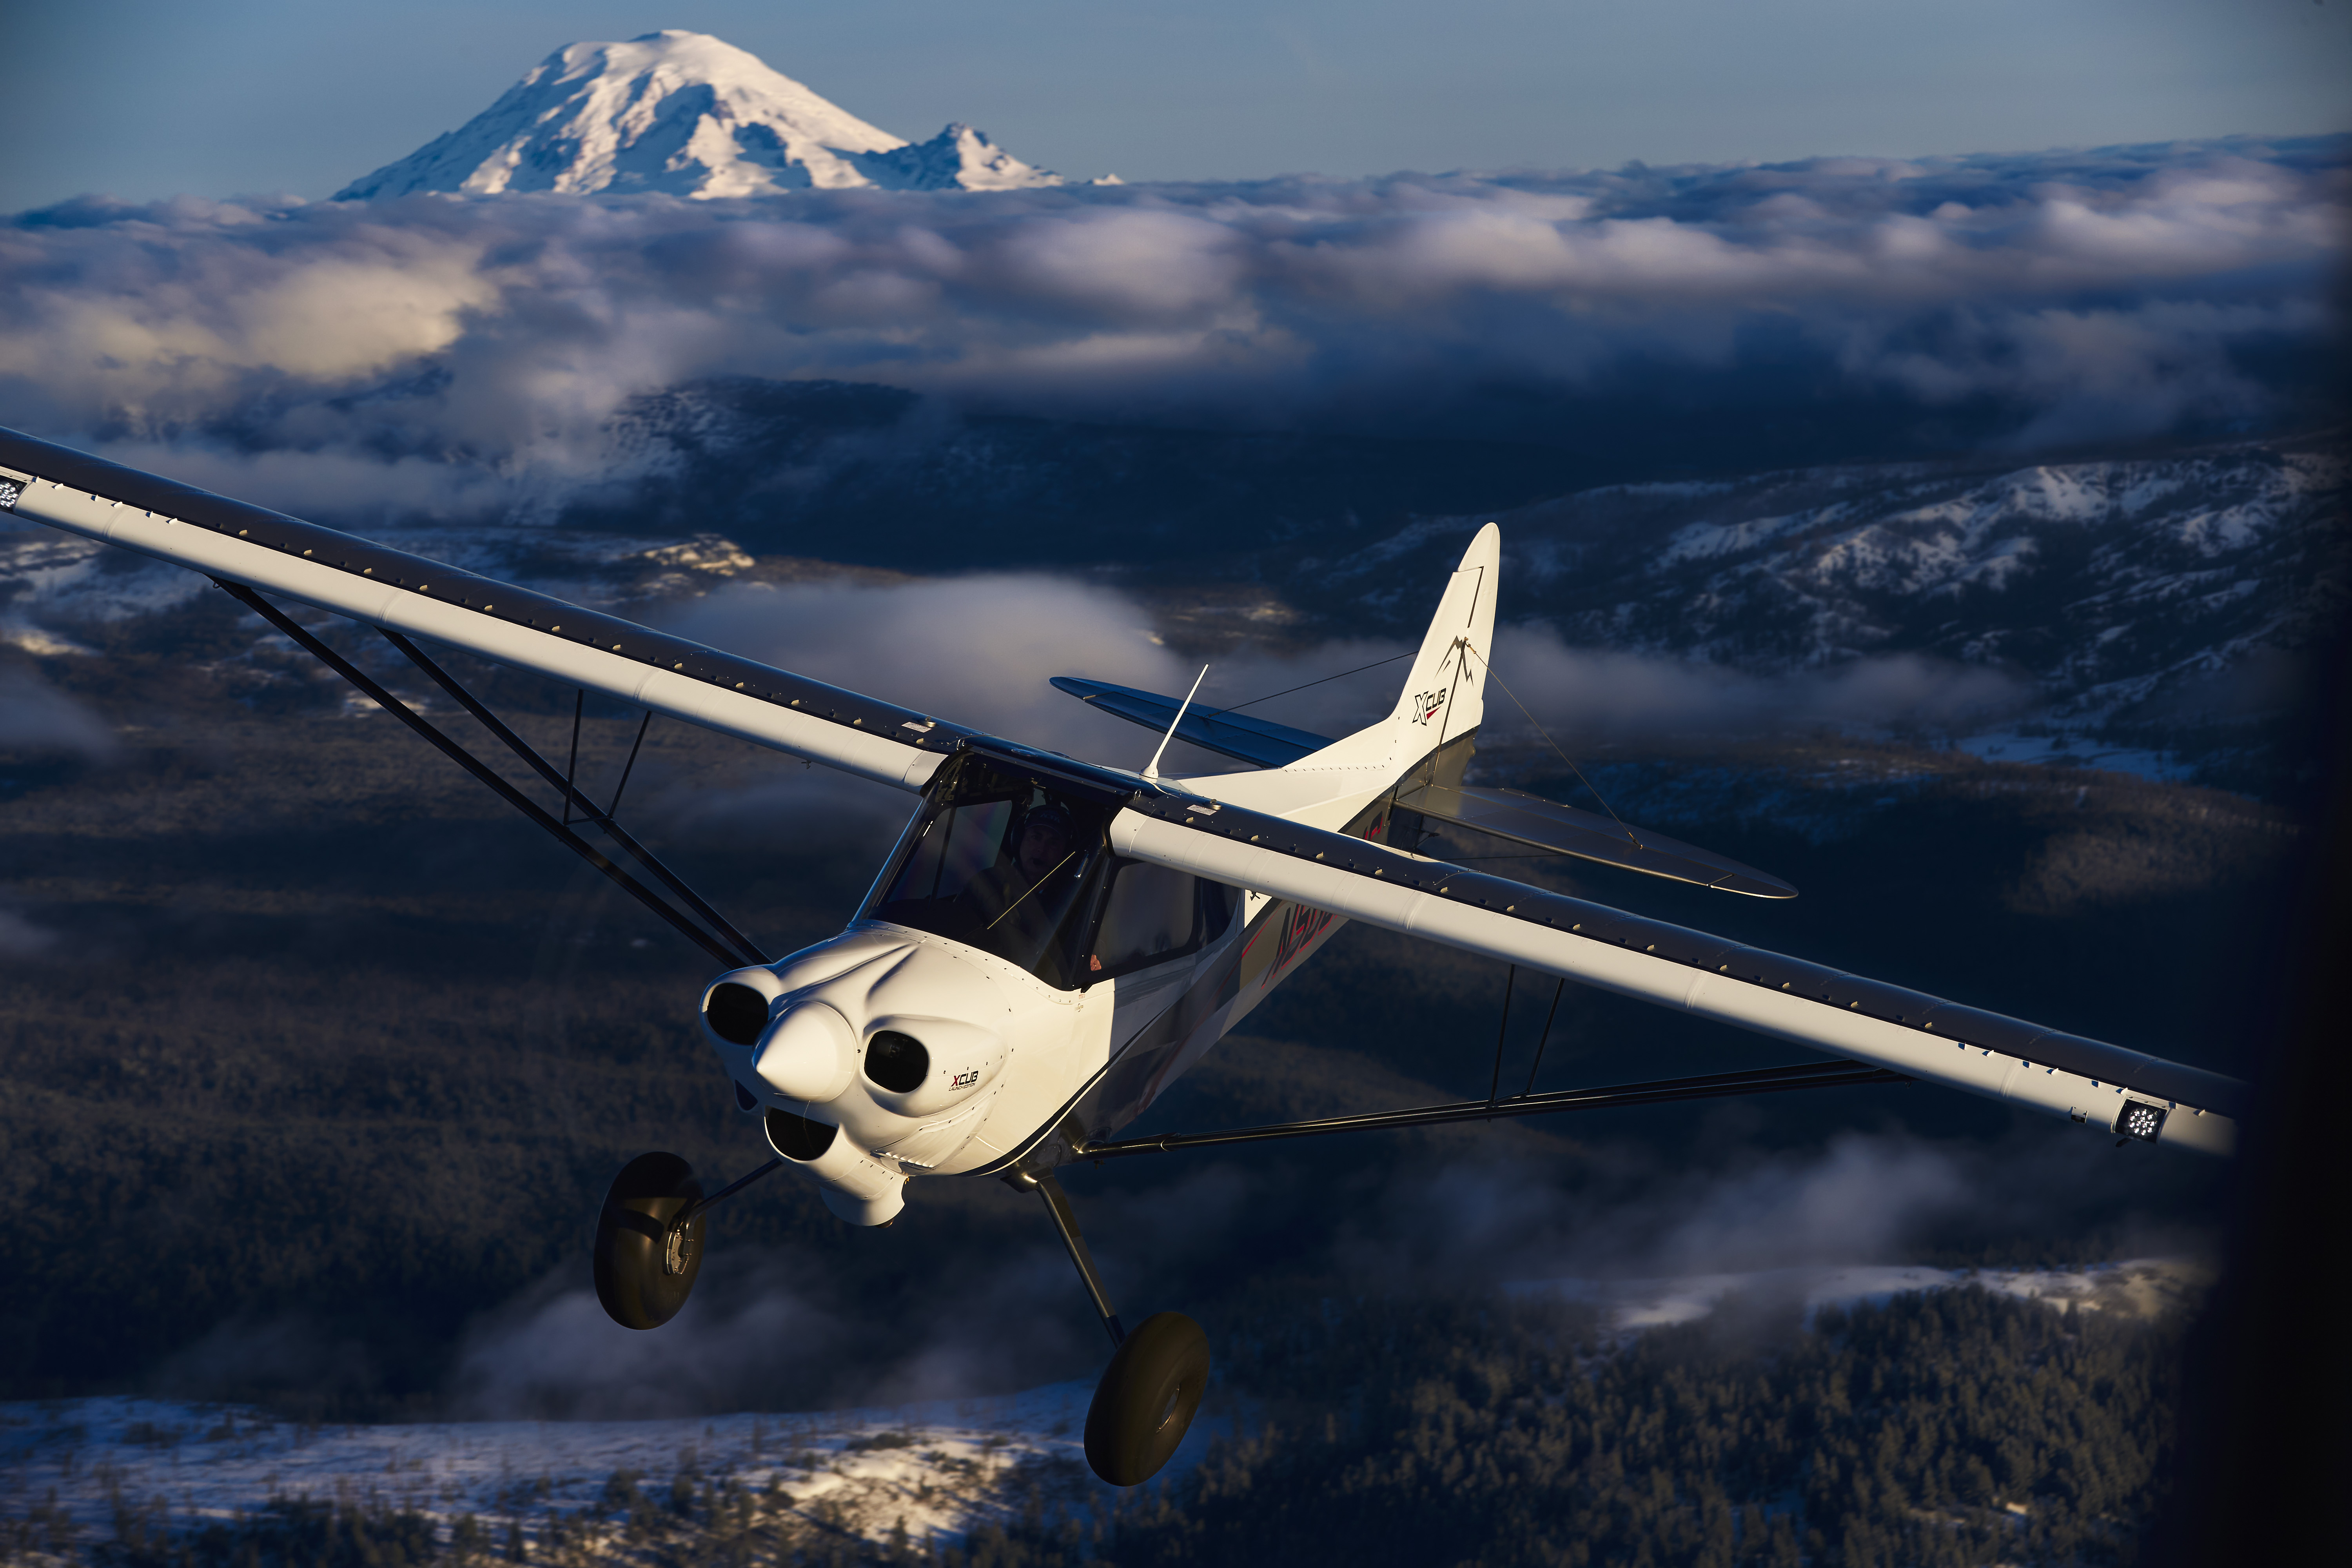 The CubCrafters XCub brings speed and range to the backcountry.